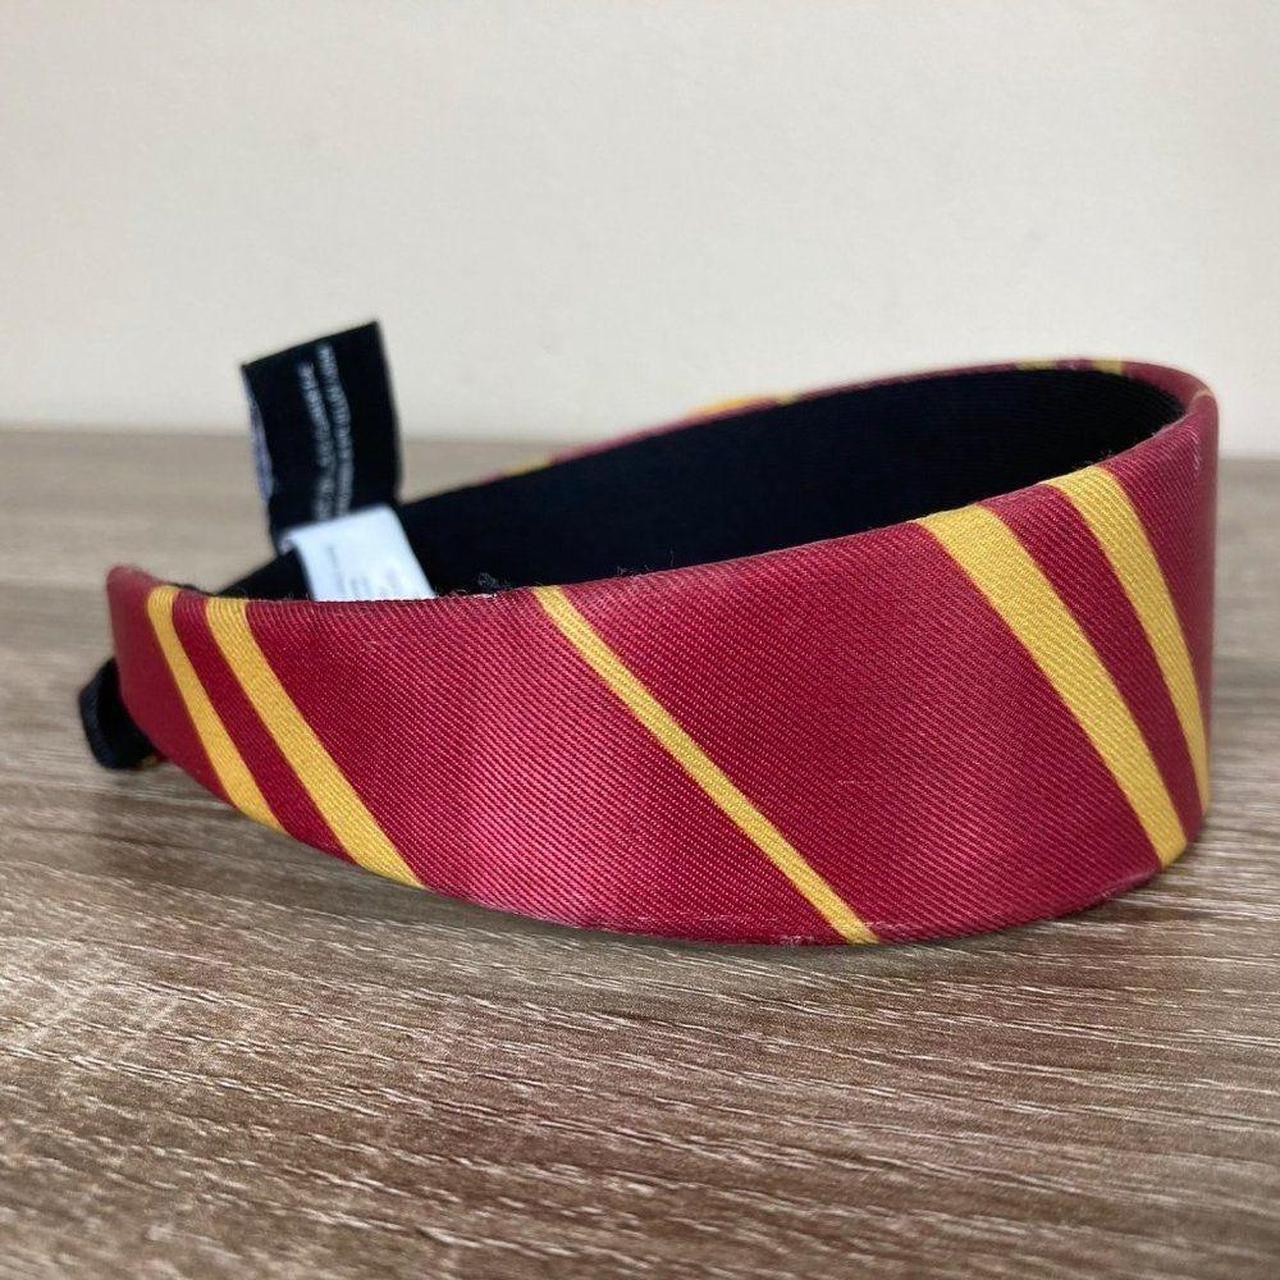 Harry Potter Kids' Hair Accessory - Red